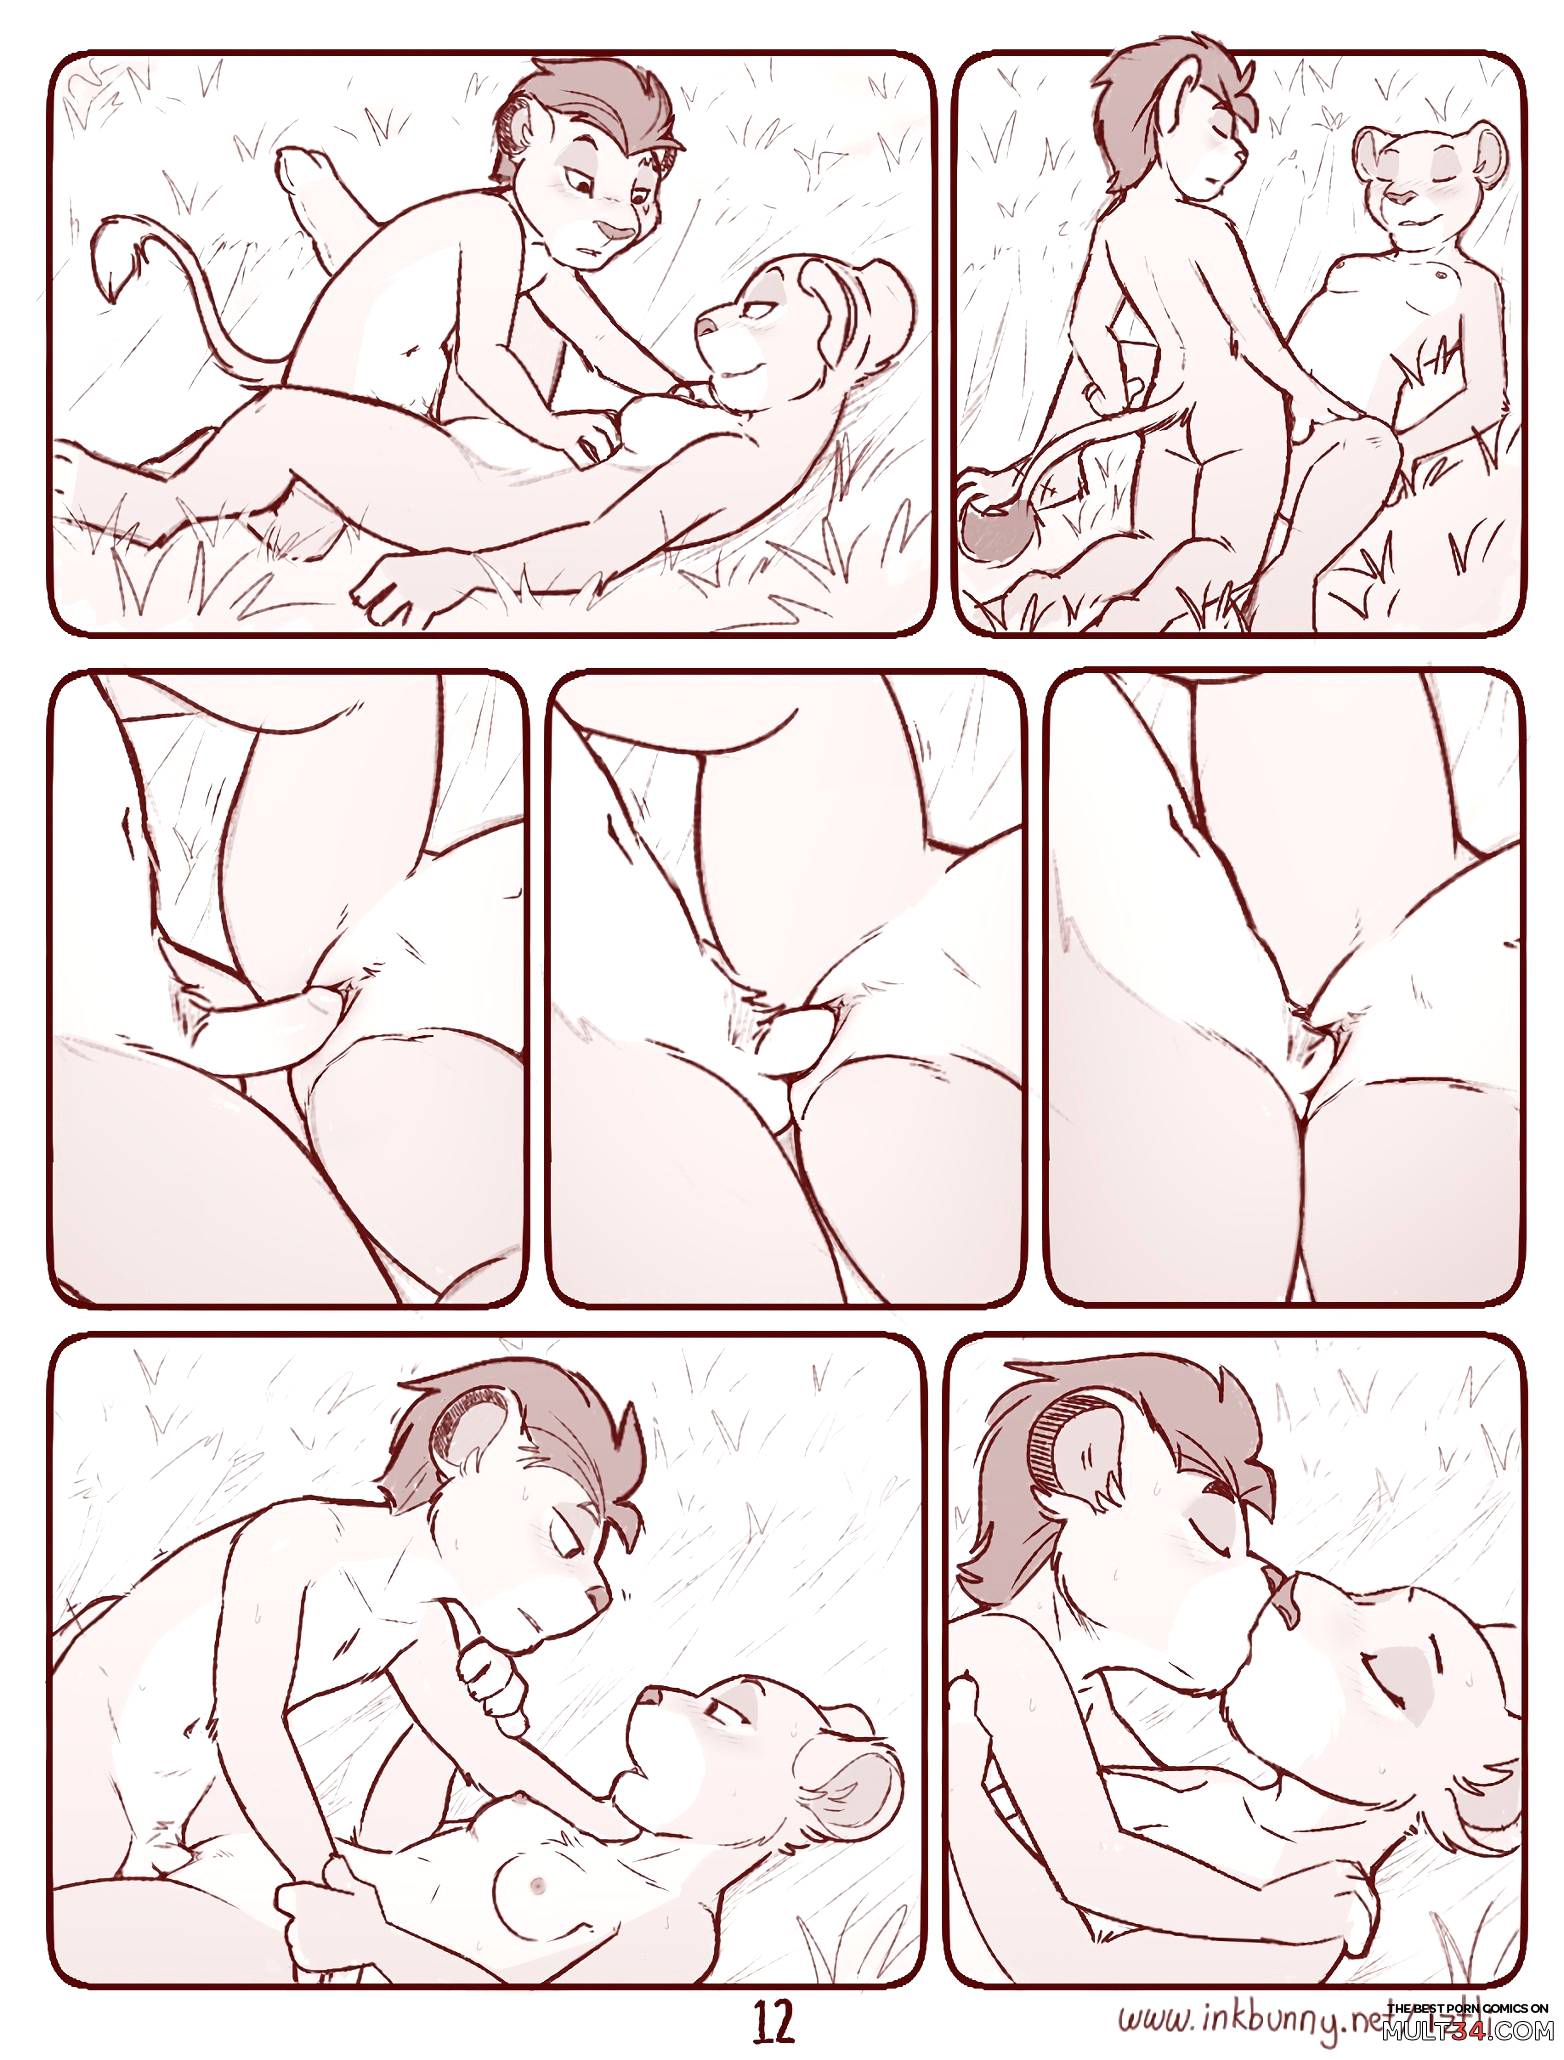 Pride Heirs page 13